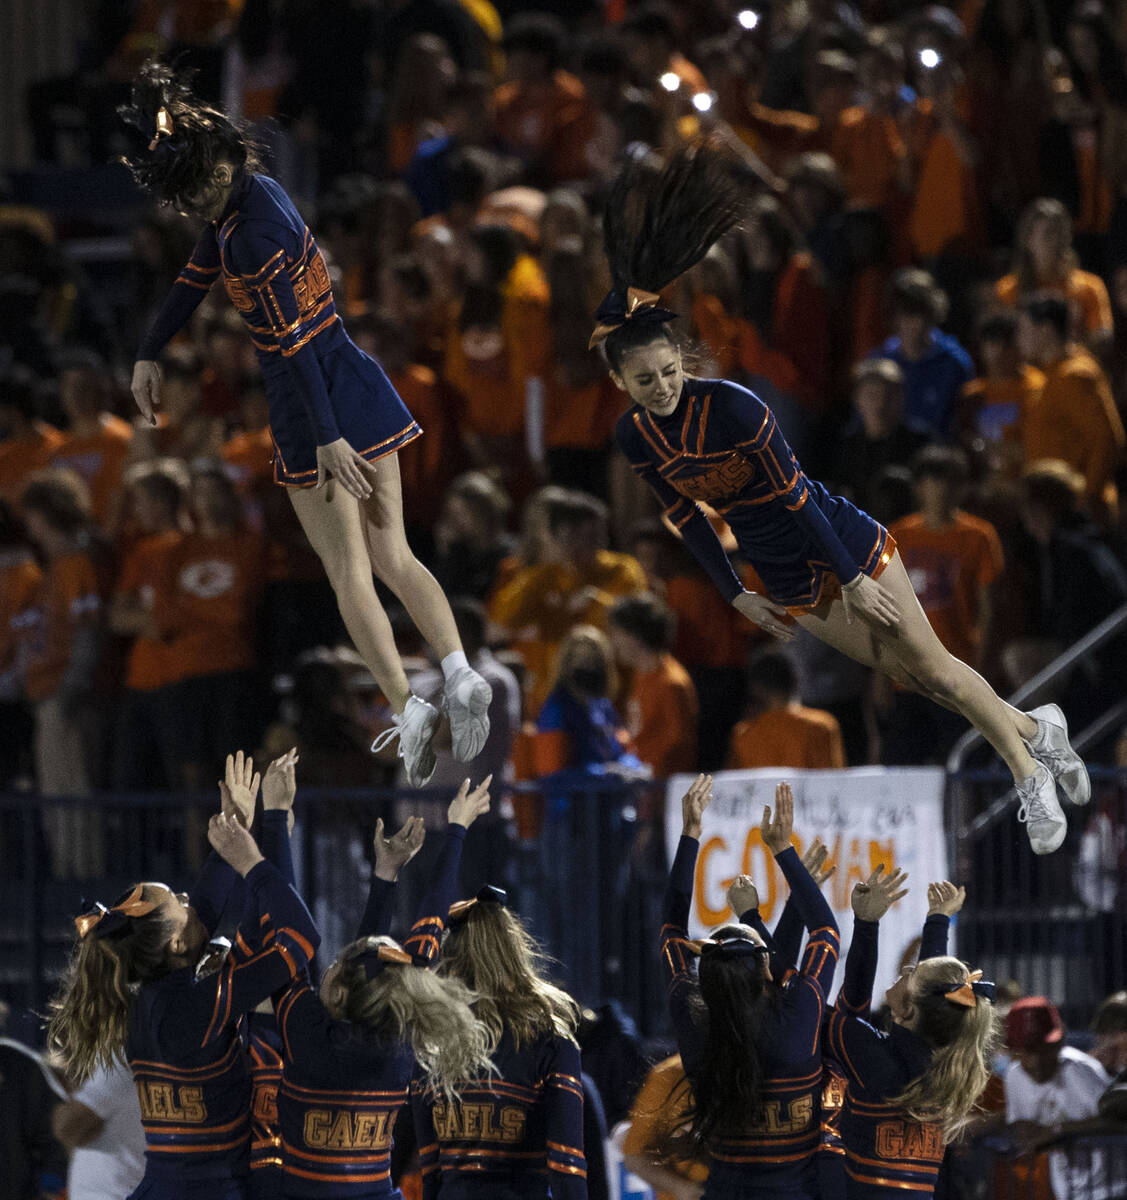 Bishop Gorman cheerleaders perform during a Class 5A state semifinal football game between Bish ...